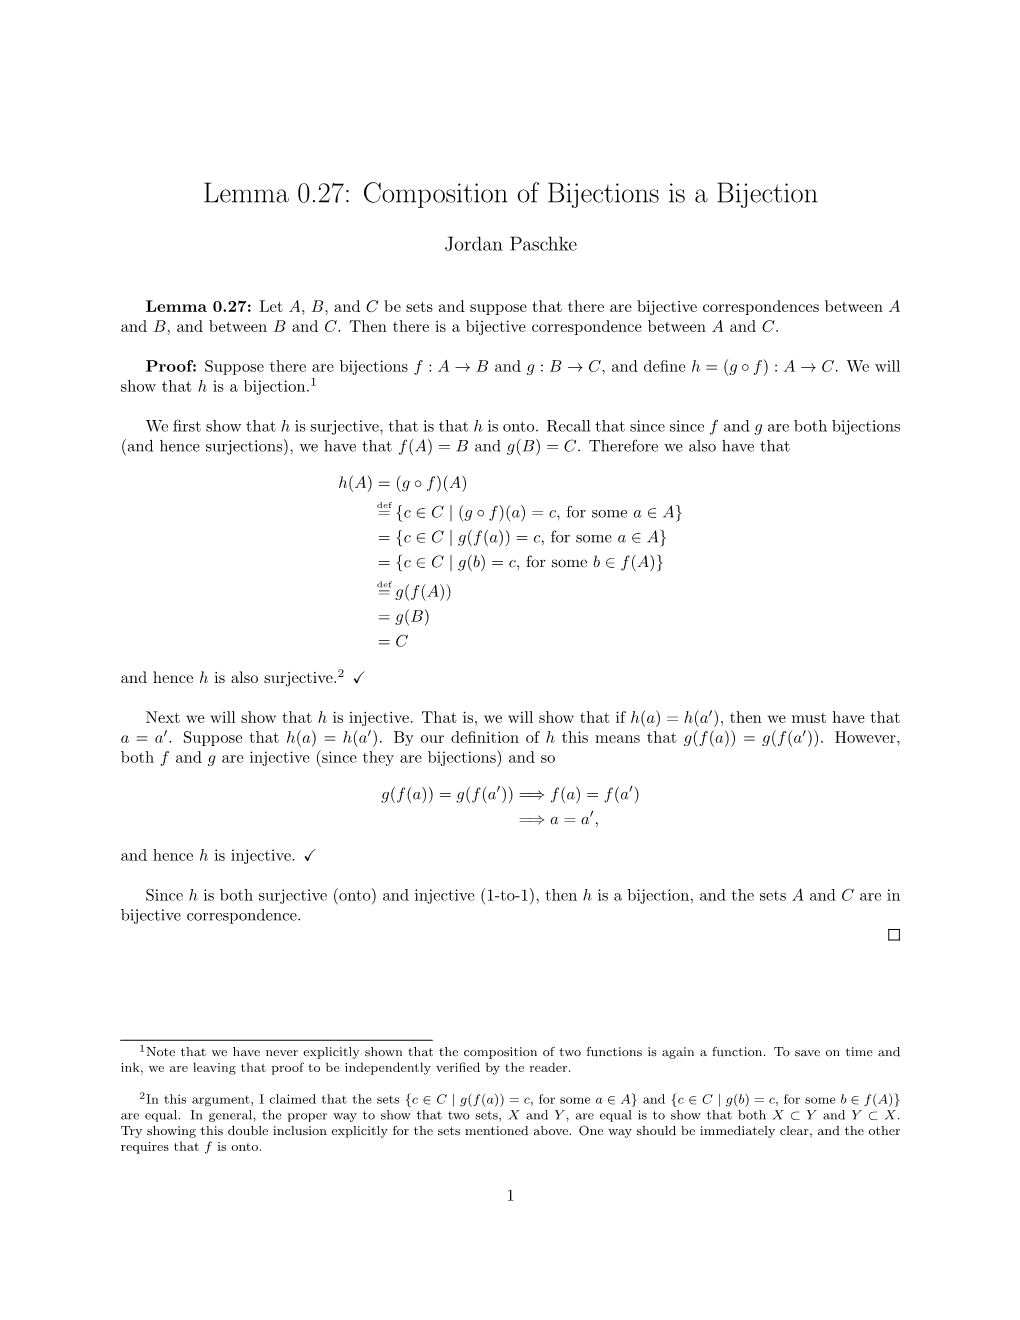 Composition of Bijections Is a Bijection